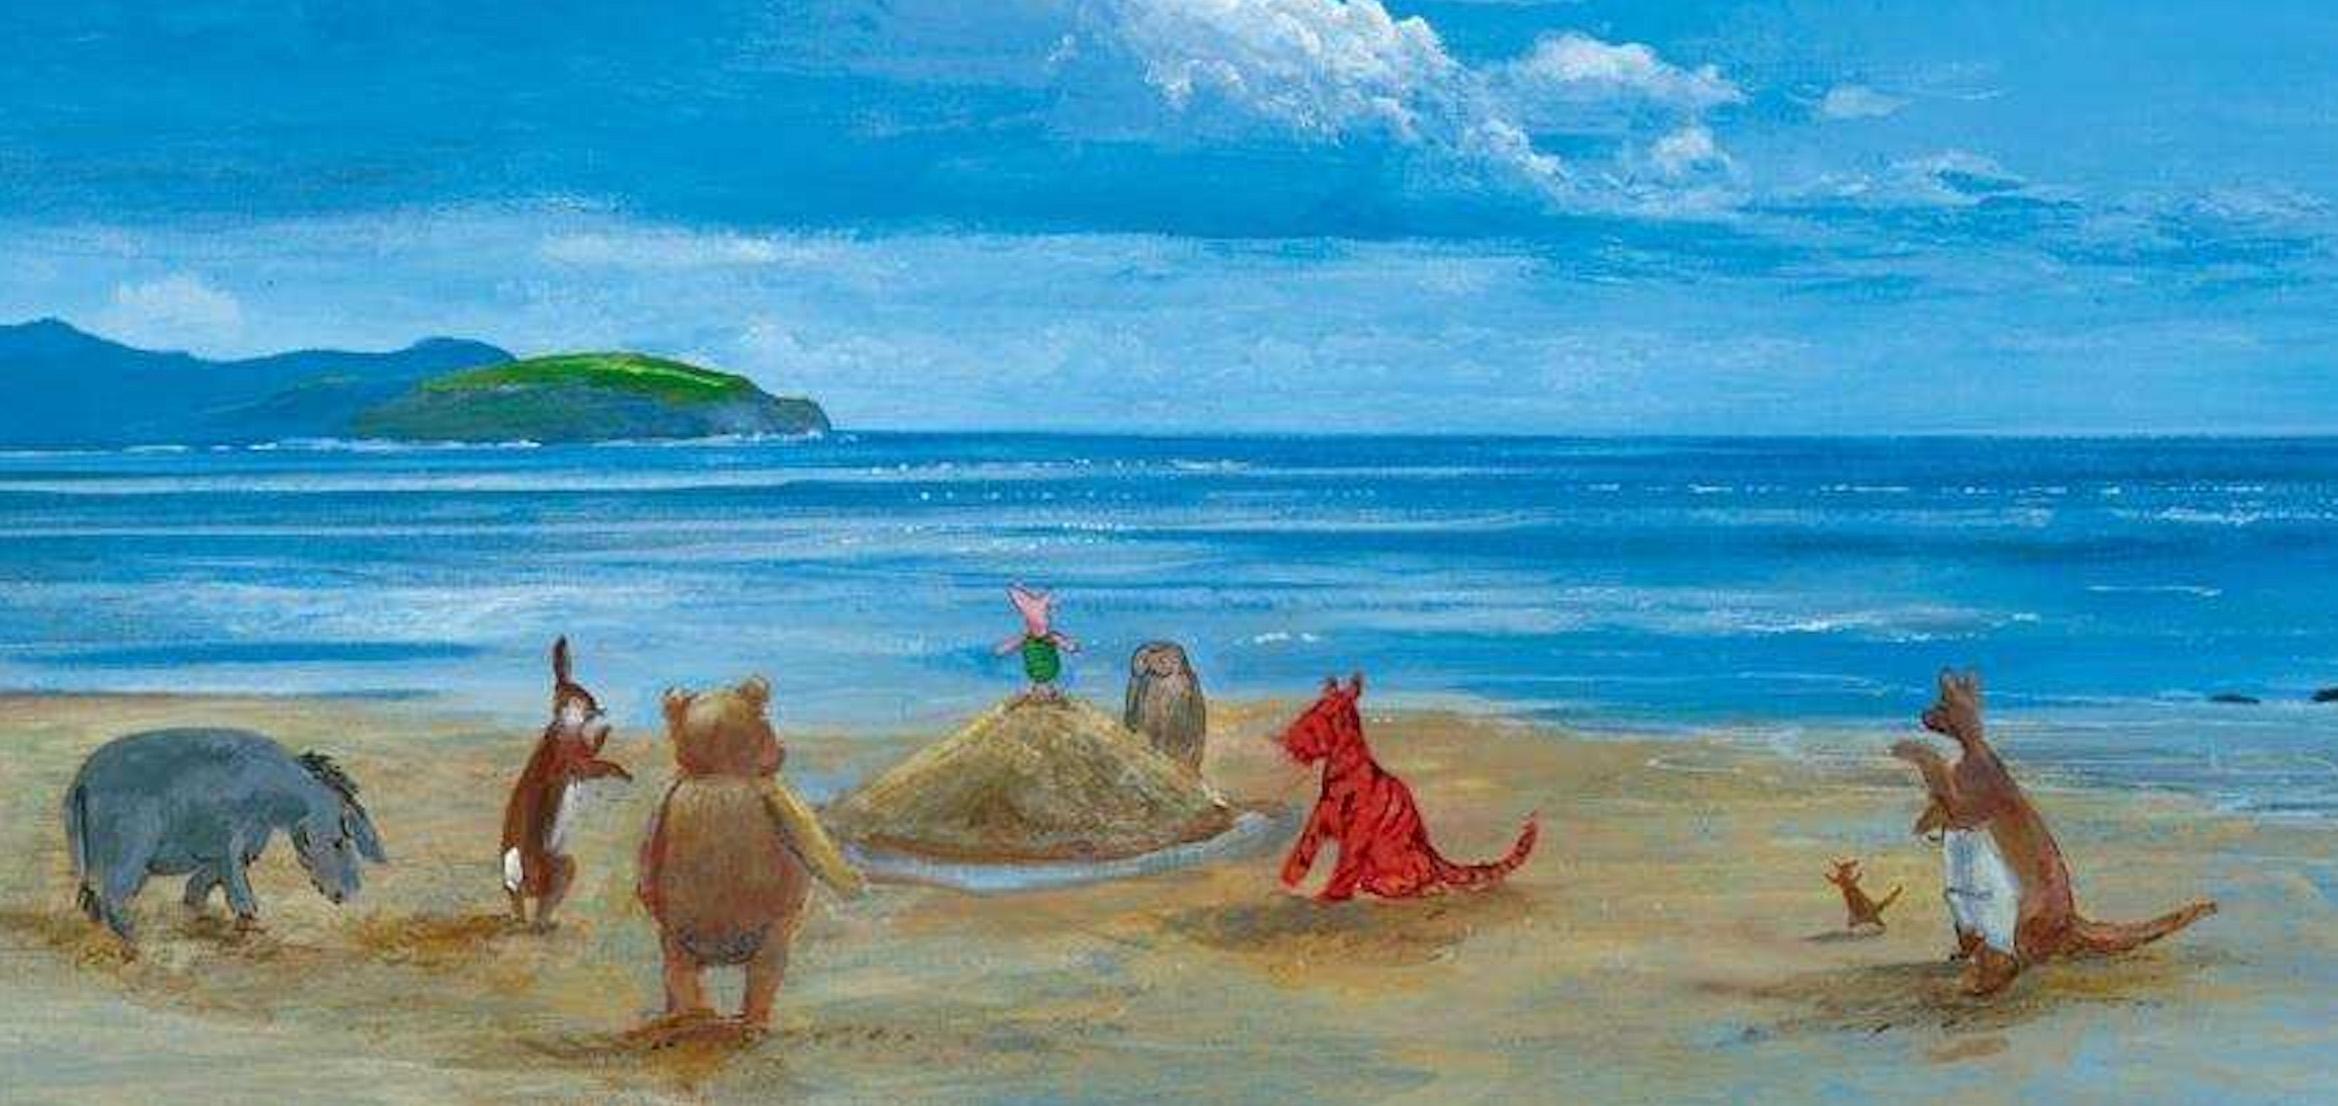 Disney Limited Edition: Pooh And Friends At The Seaside - Art by Peter Ellenshaw